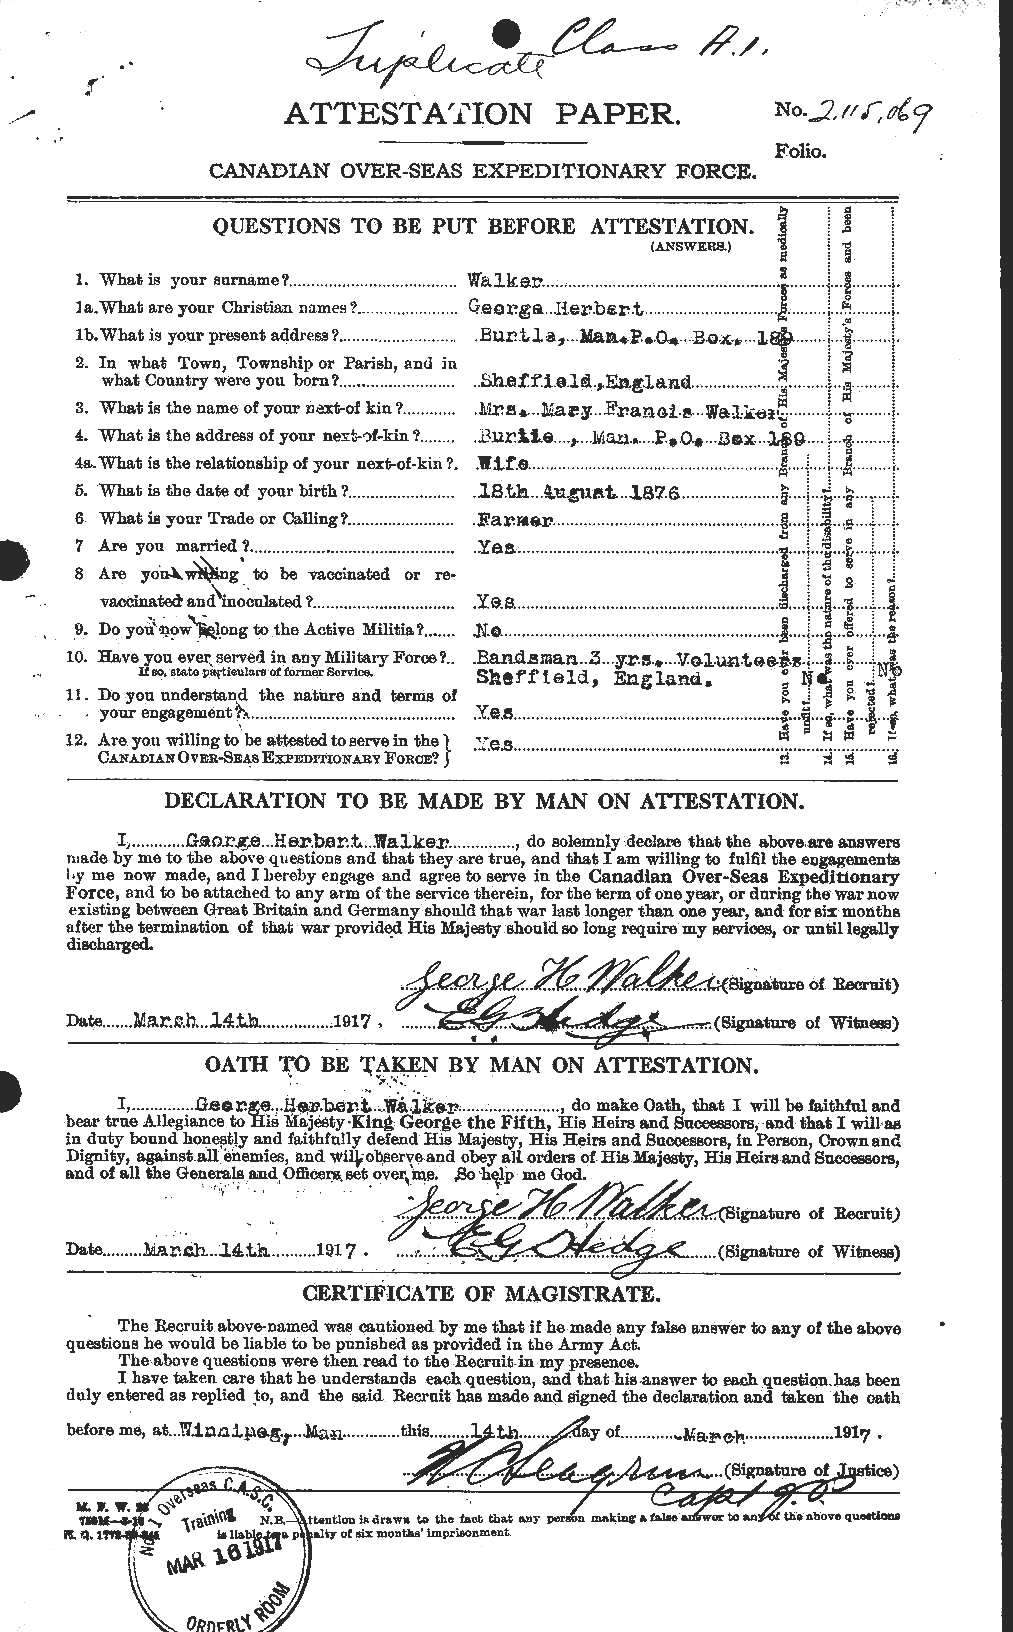 Personnel Records of the First World War - CEF 651980a